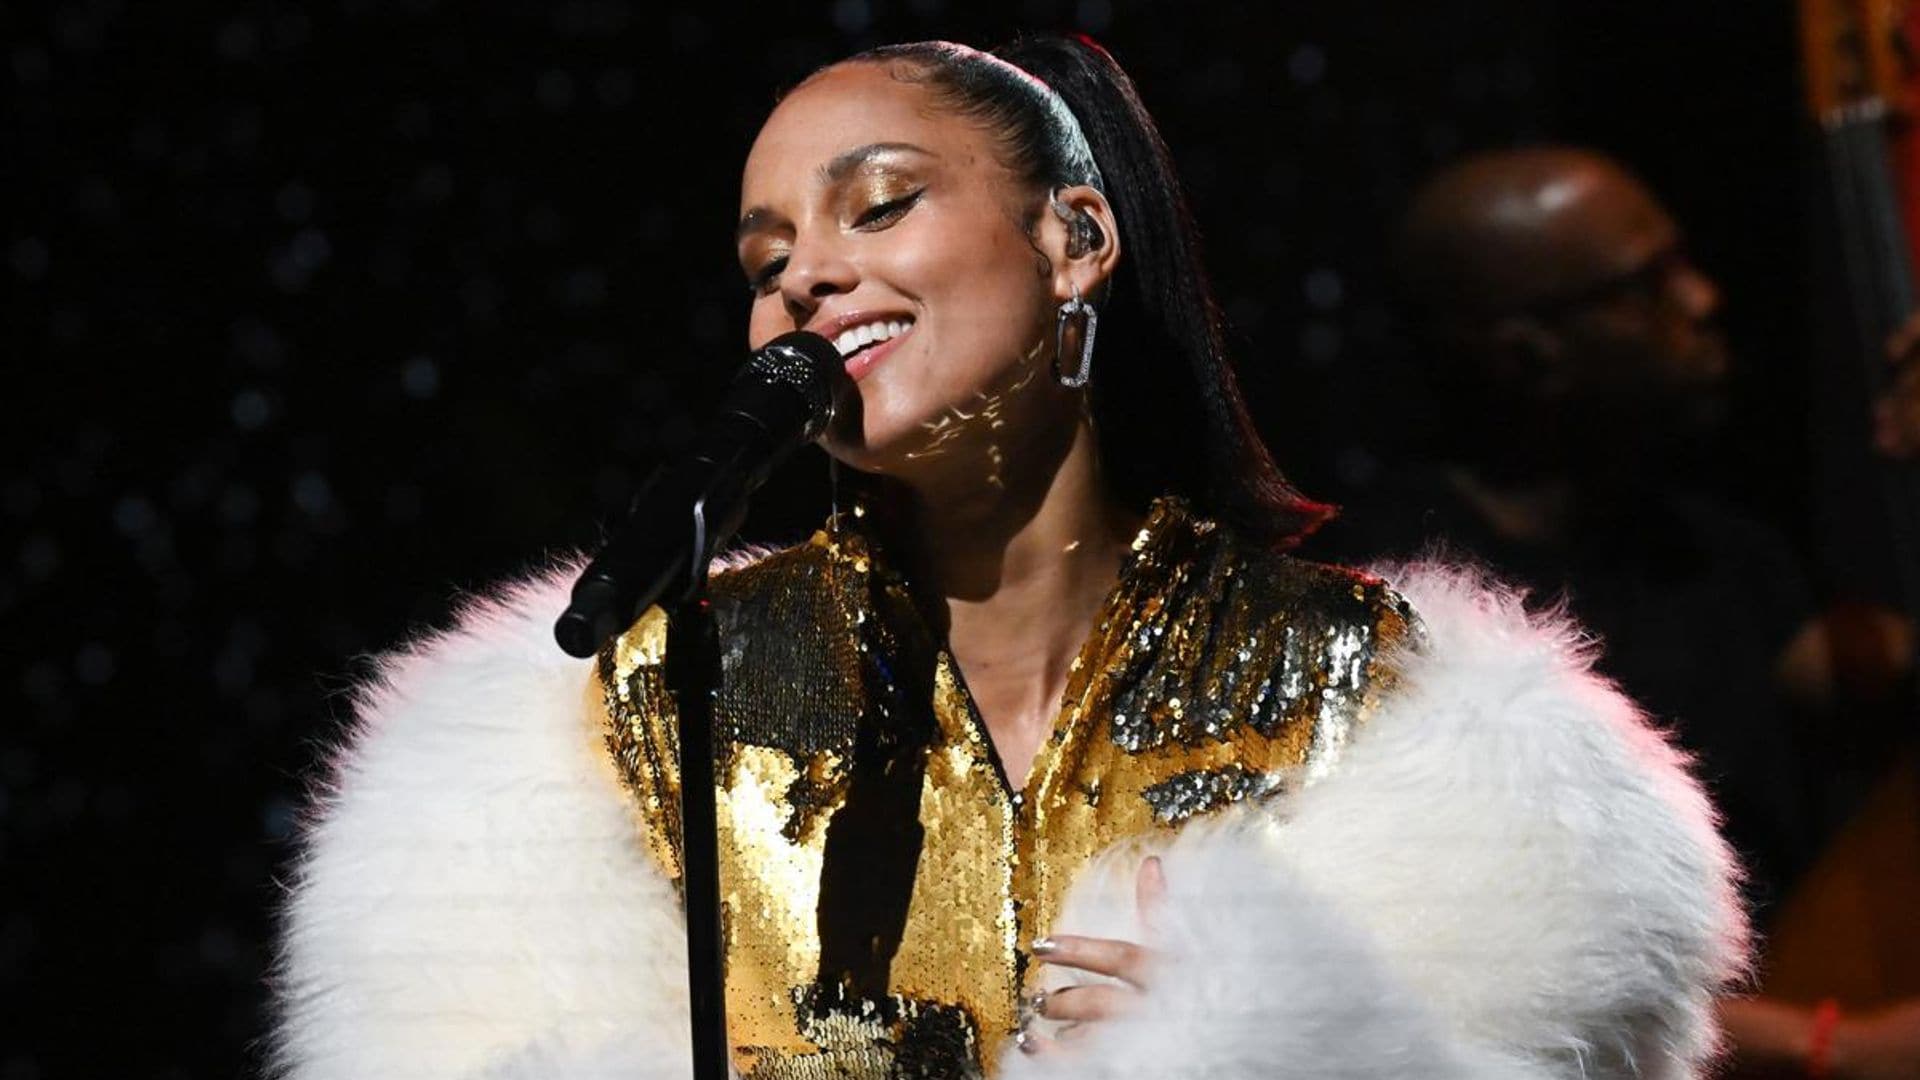 Alicia Keys surprises fans with Cazzu in Buenos Aires concert